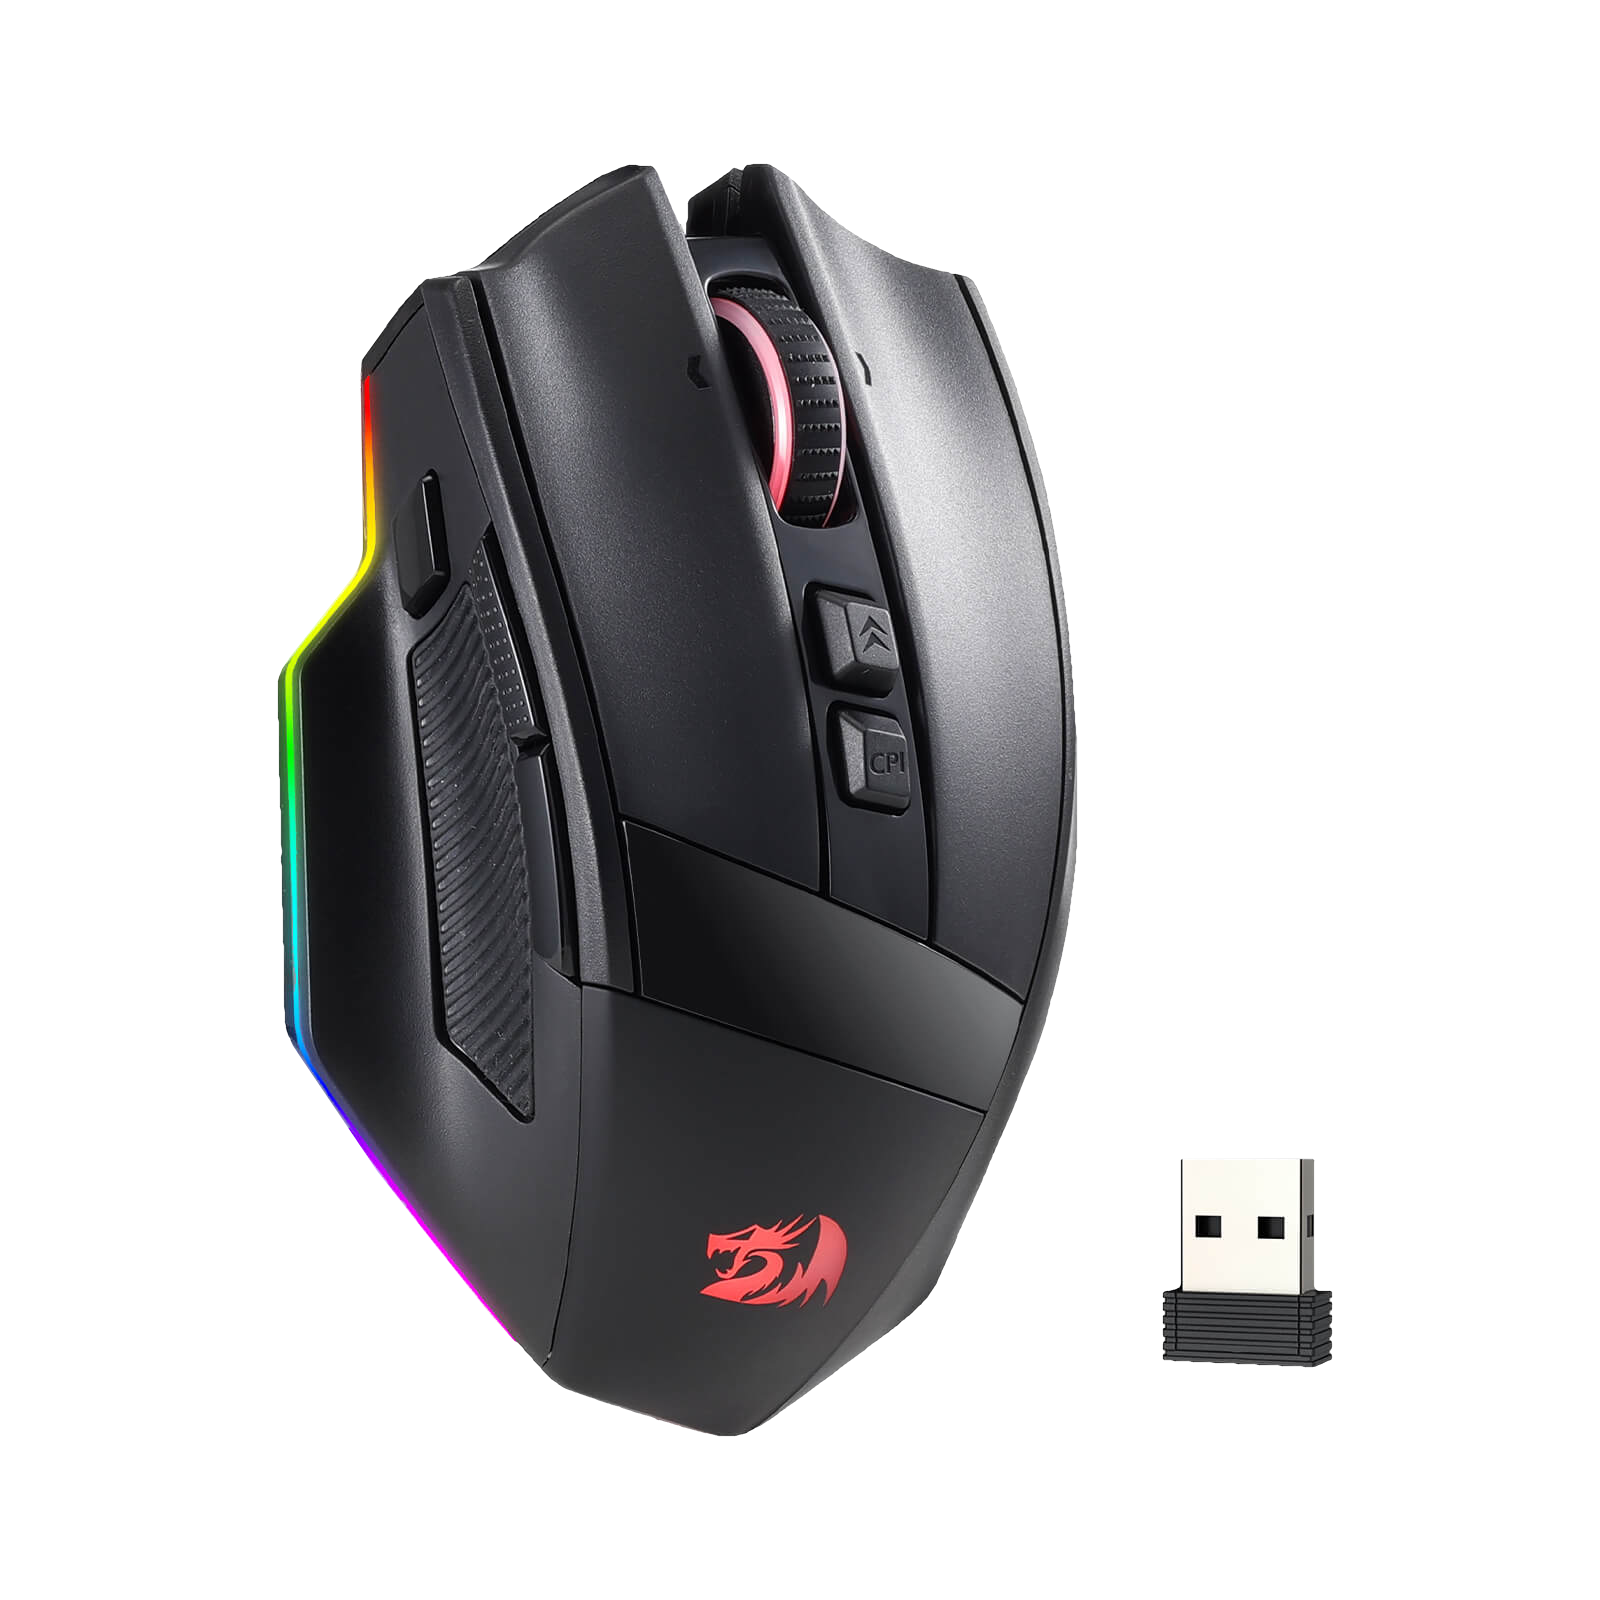 Redragon M813 PRO 3-Mode RGB Gaming Mouse with 4D Dual Mode Scroll Wheel, Optical Ergonomic Gamer Mouse with Max 26,000DPI, Pro Precision Sensor 3395, 7 Macro Buttons, Software Supported| show